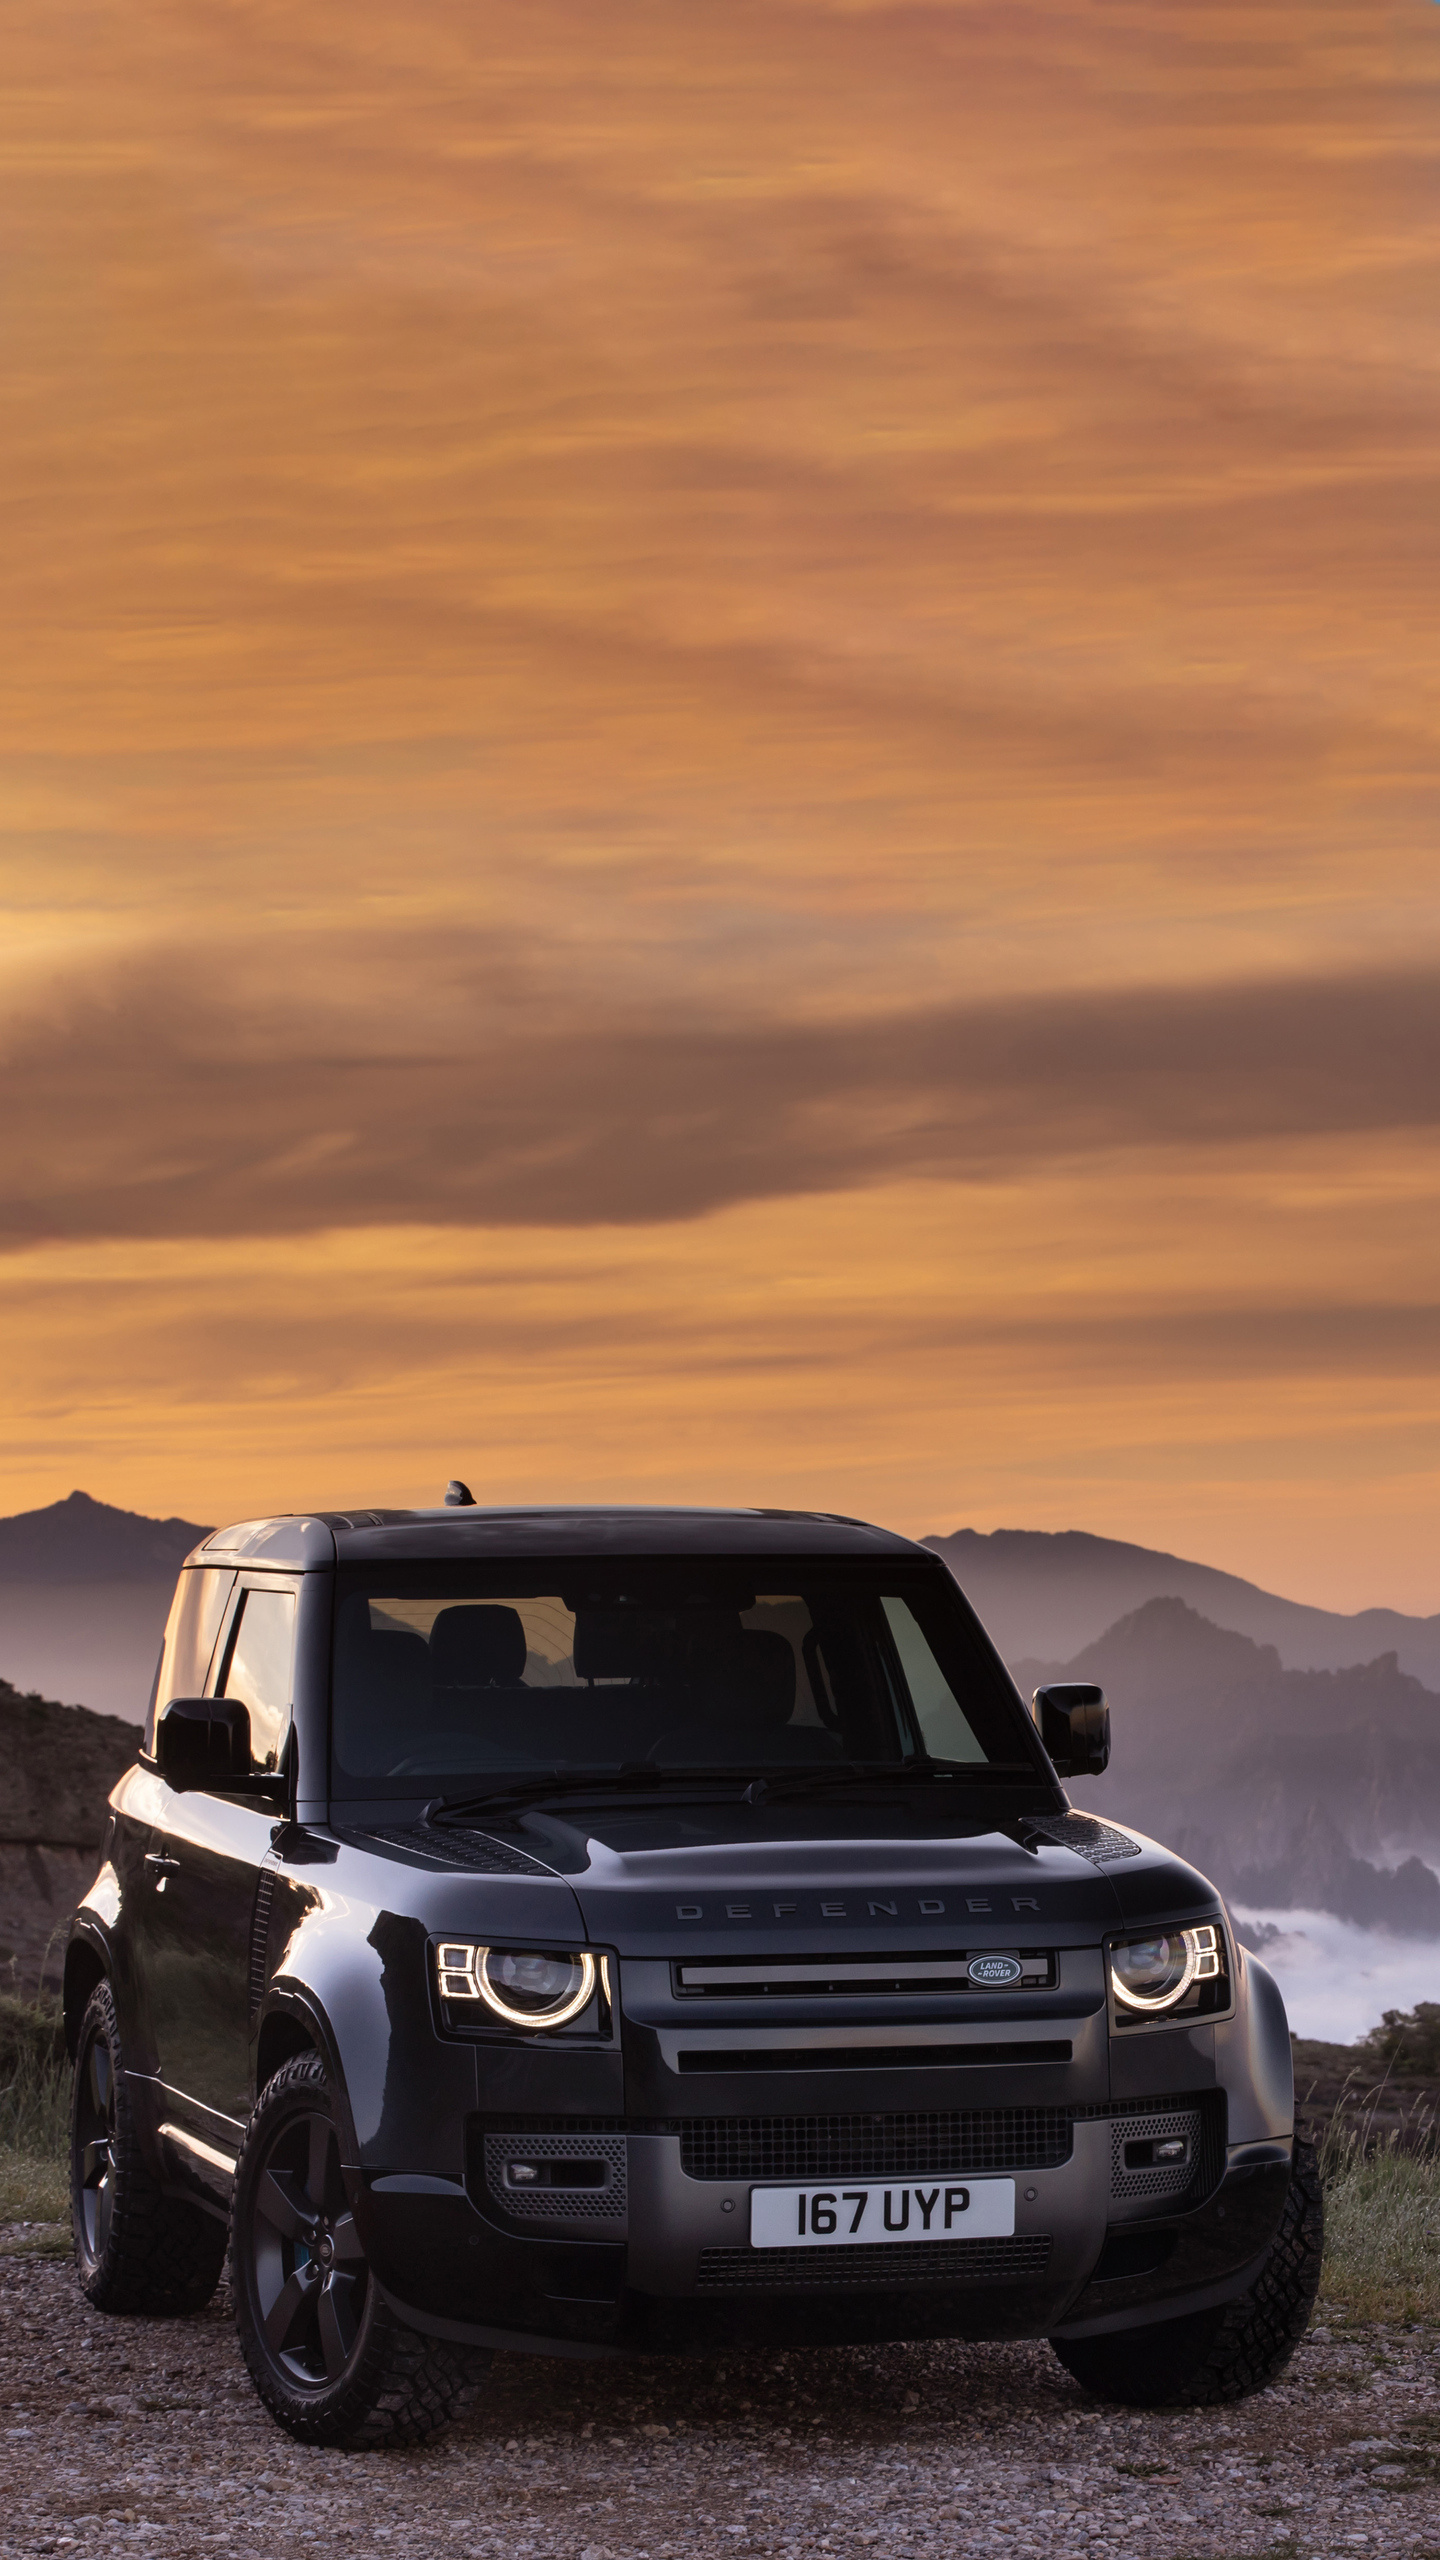 Land Rover Defender, 2021 model, Compact SUV, High quality images, 1440x2560 HD Phone